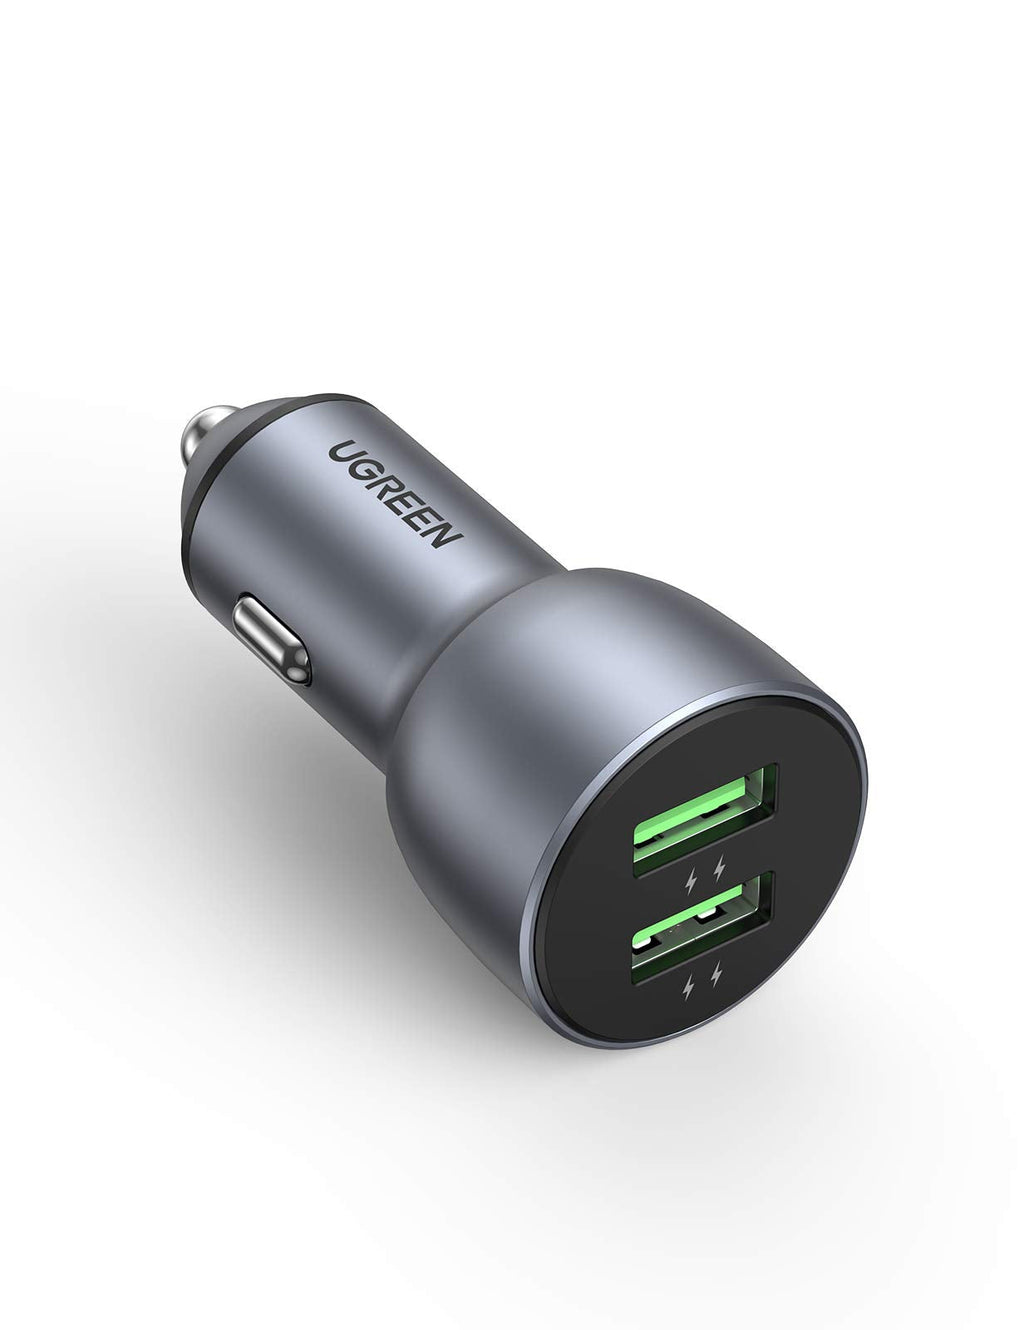  [AUSTRALIA] - UGREEN USB Car Charger Adapter 36W - Dual USB Car Charger Fast Charging, Cigarette Lighter Adapter Compatible with iPhone 14/13/12/11/SE/XR/X/XS, Galaxy S22/S21/S20/S10/Note 20, Pixel 5/4/3